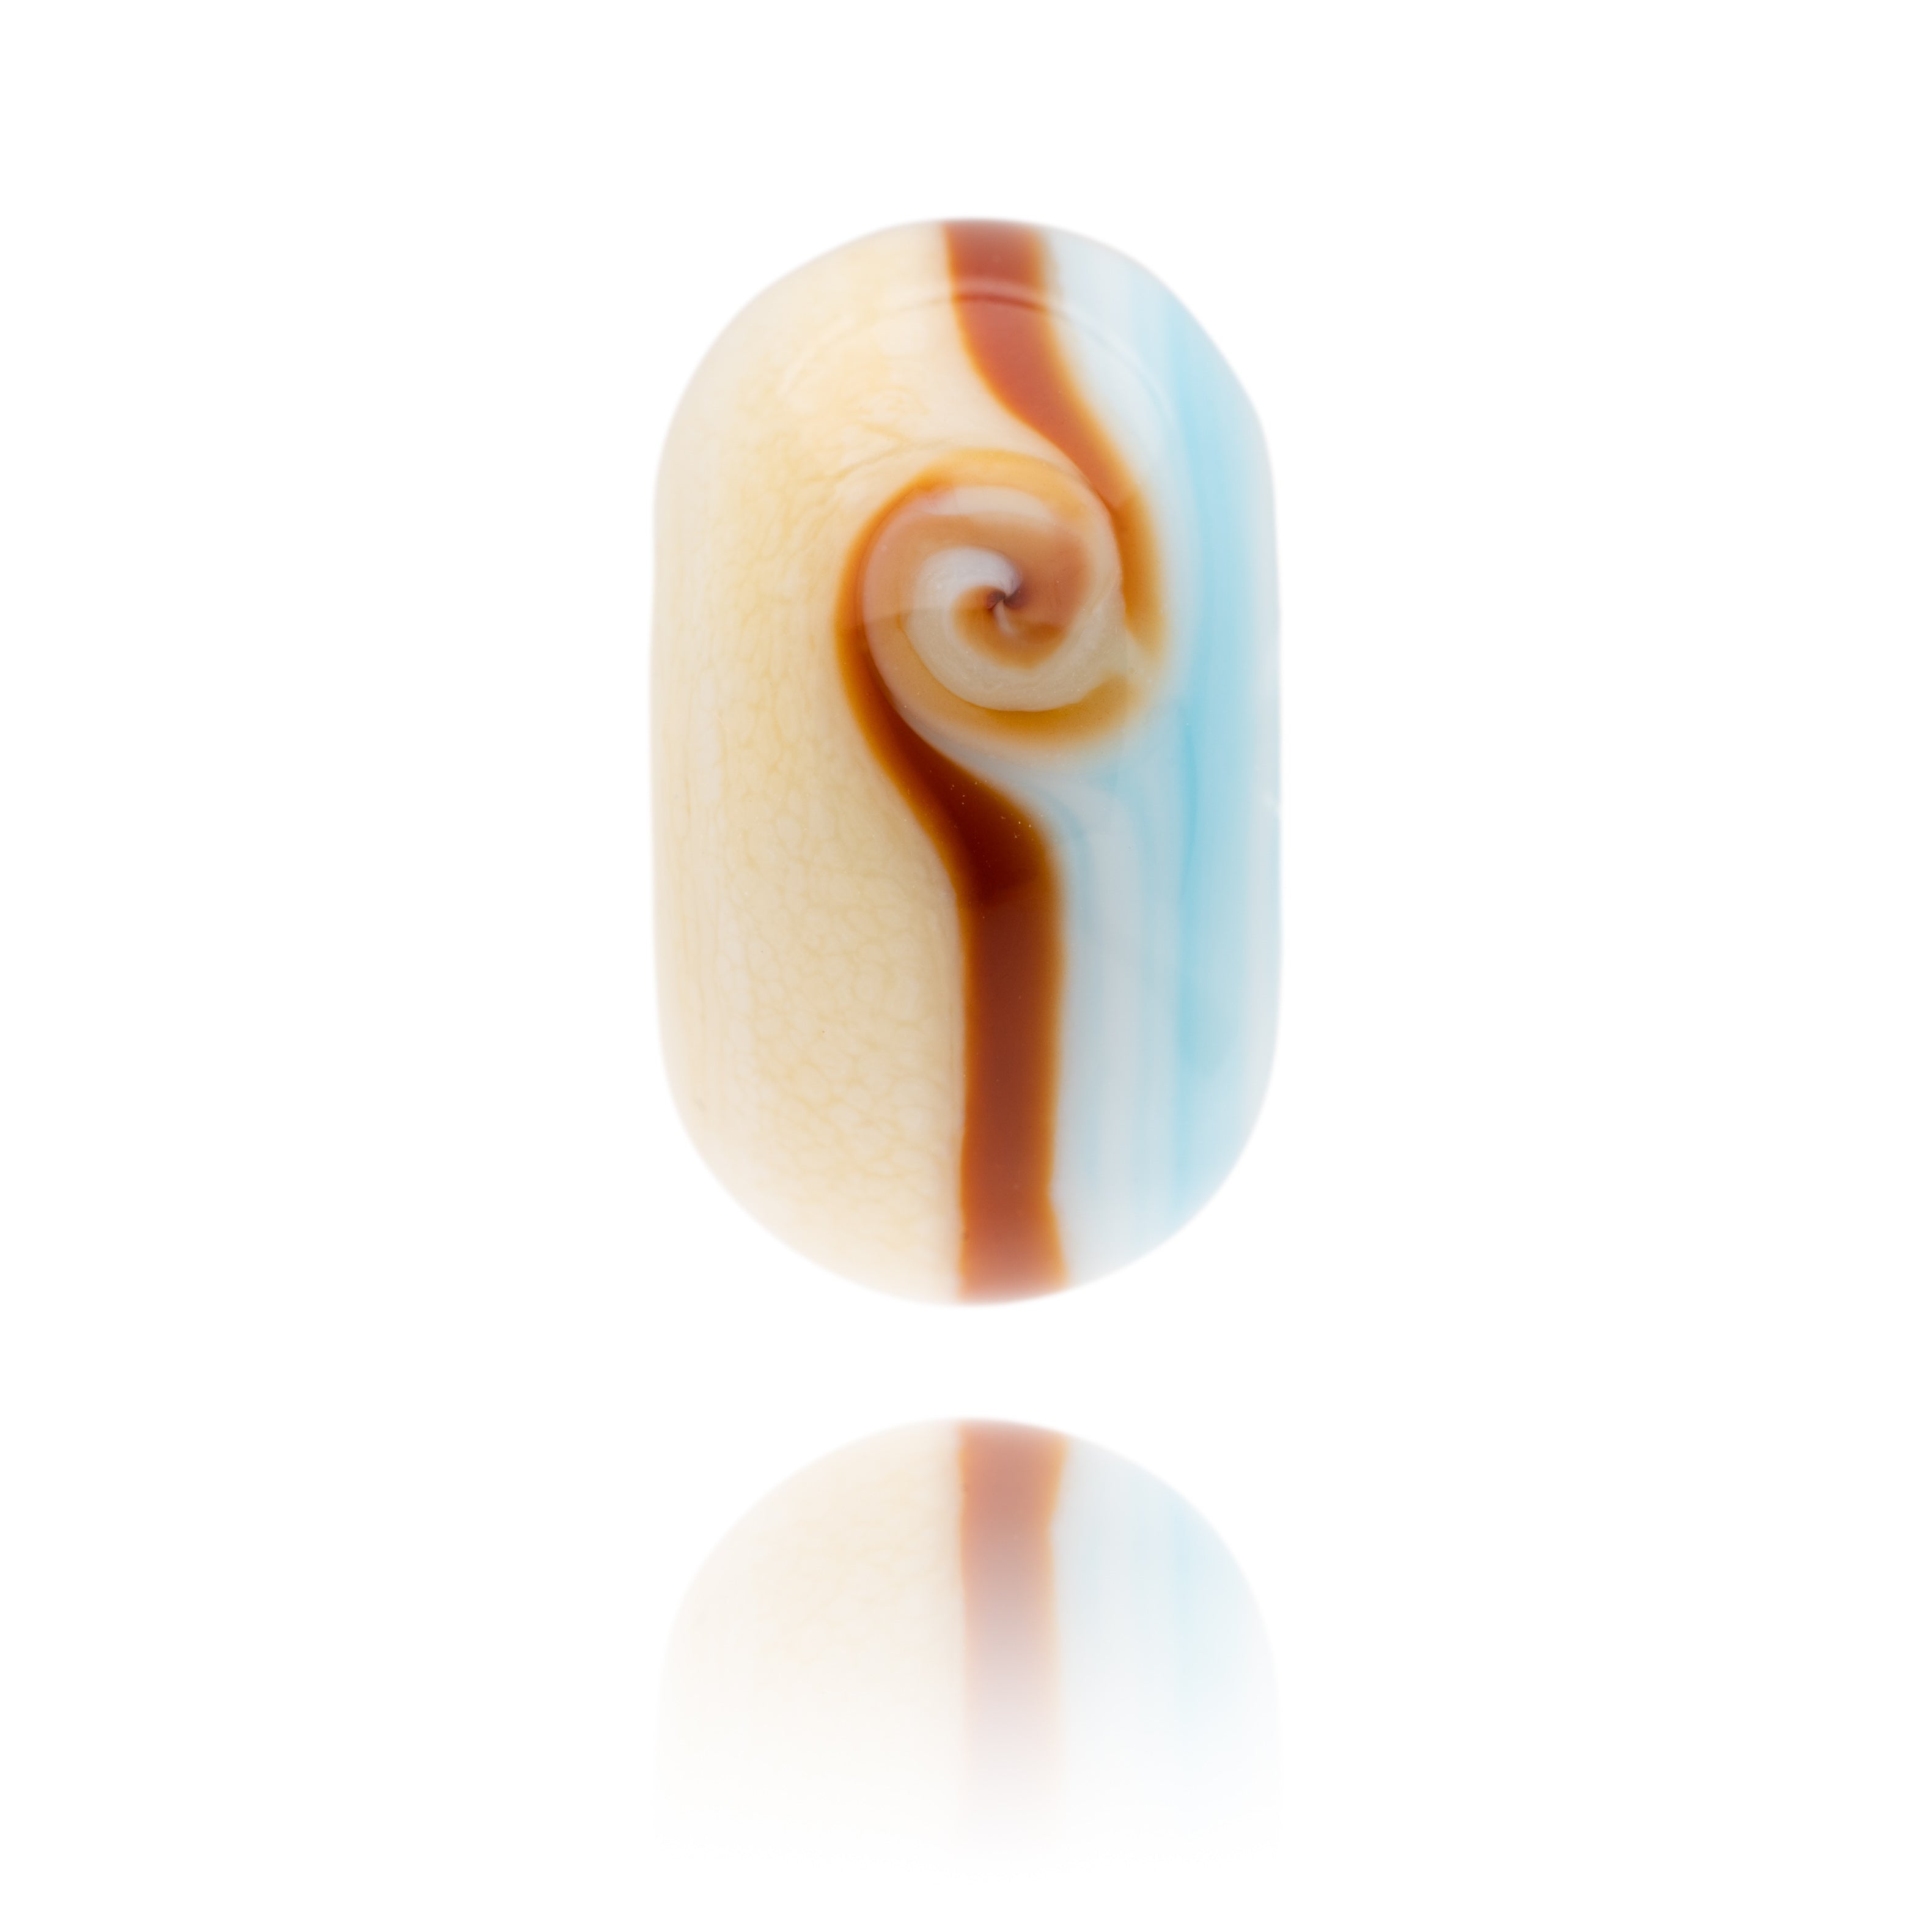 Ivory and blue glass bead with red brown stripe around the middle representing Littlehampton beach in Sussex.